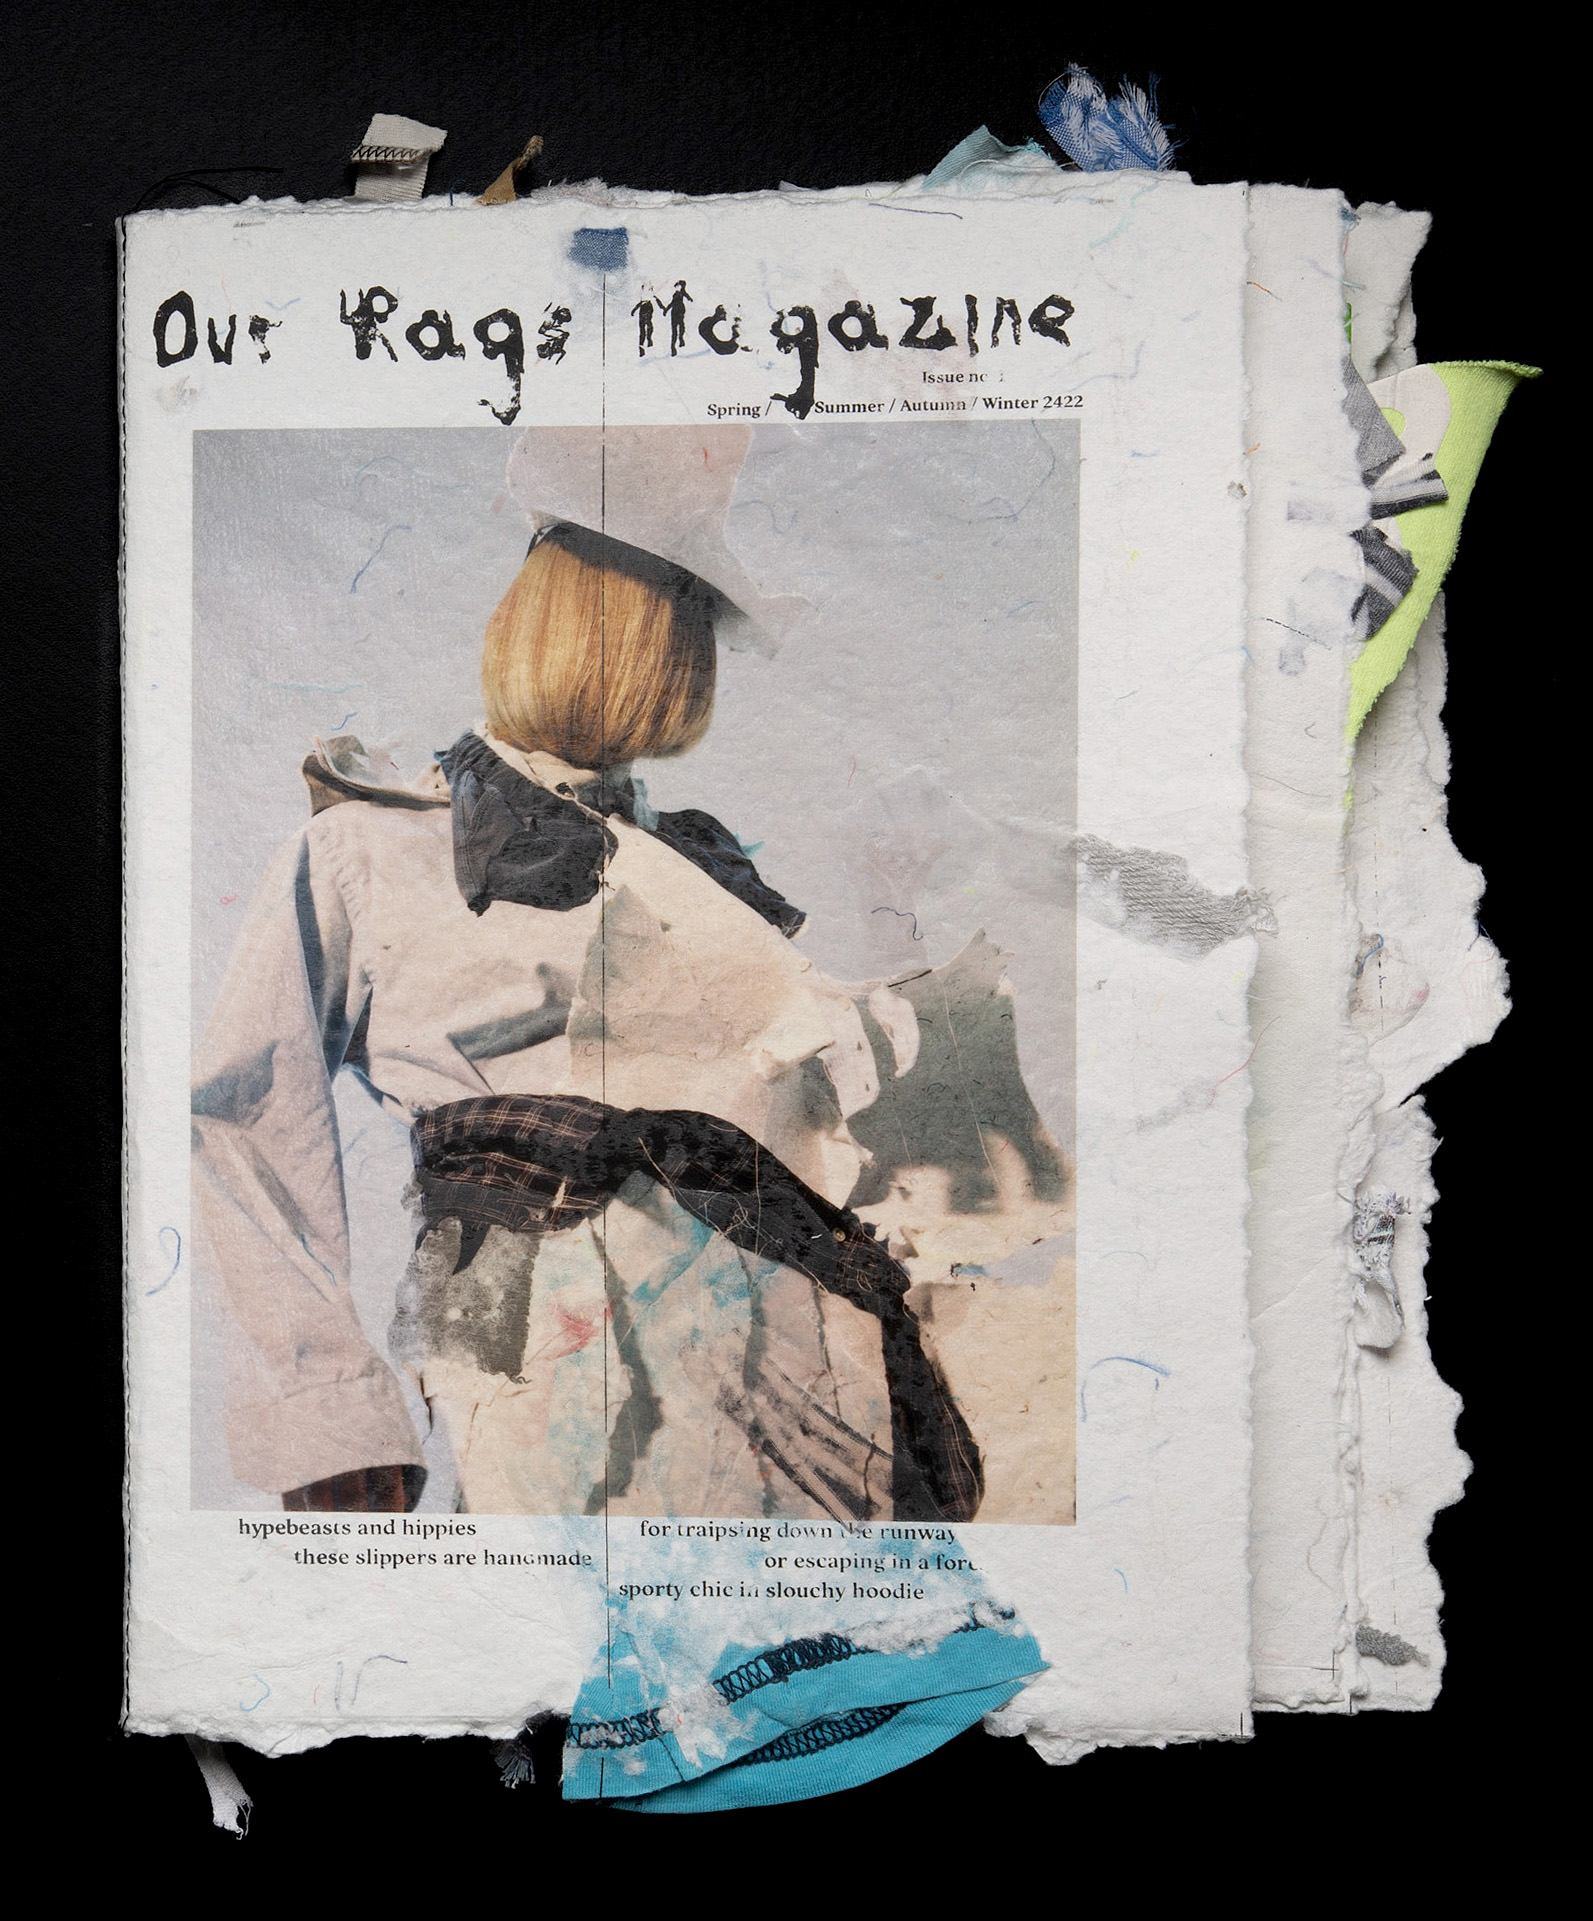 Cover image for a-garment-in-a-magazine-is-a-magazine